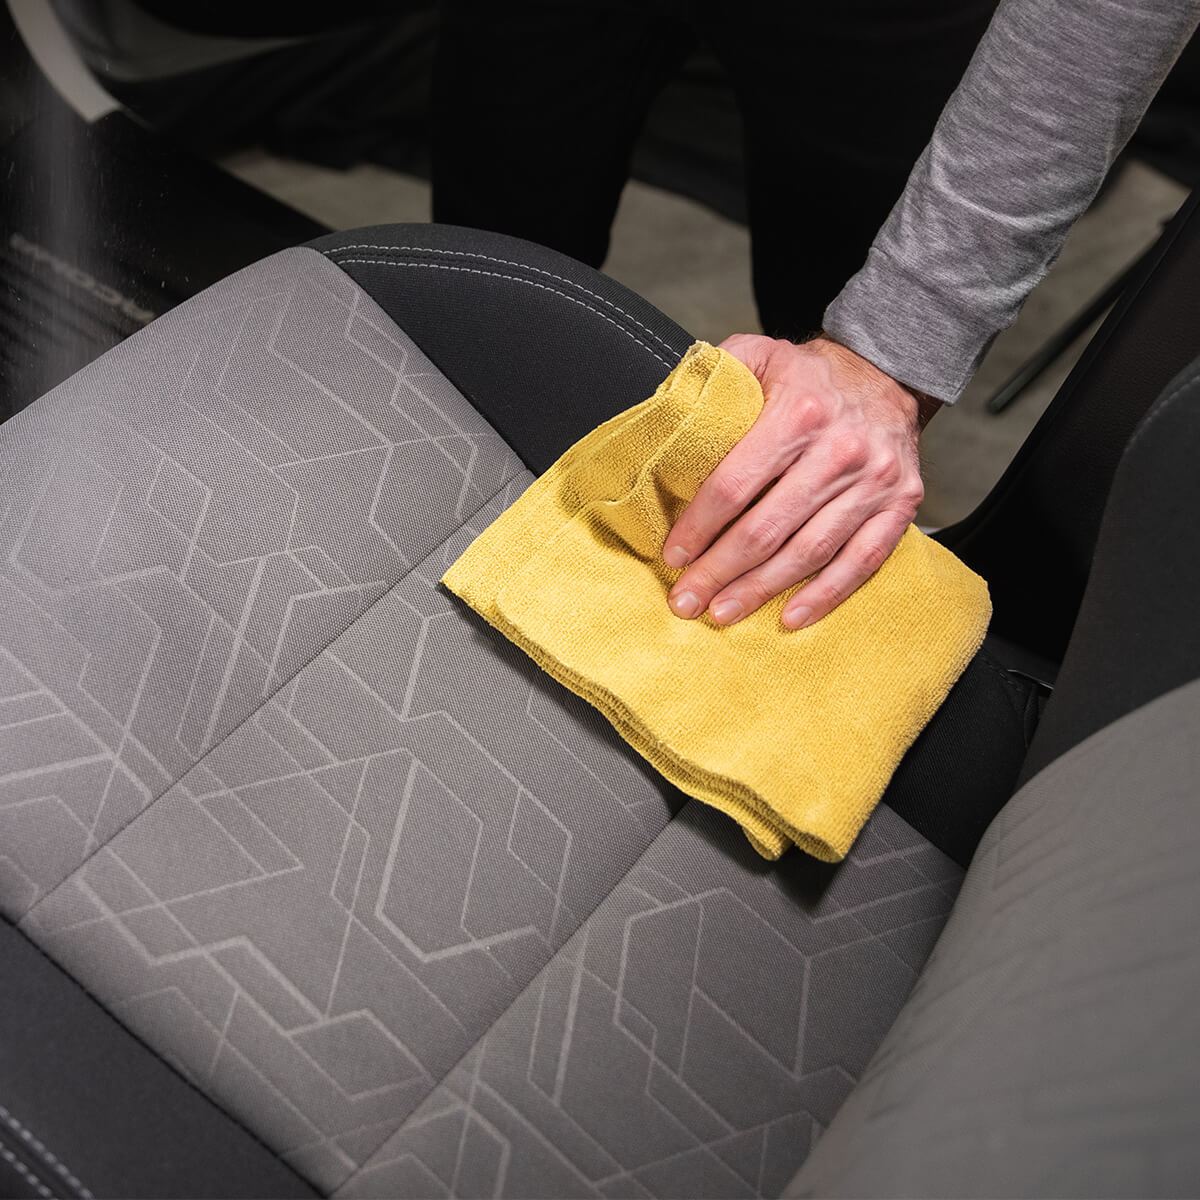 11 Easy Ways to Clean Vomit From a Car Seat [2023]